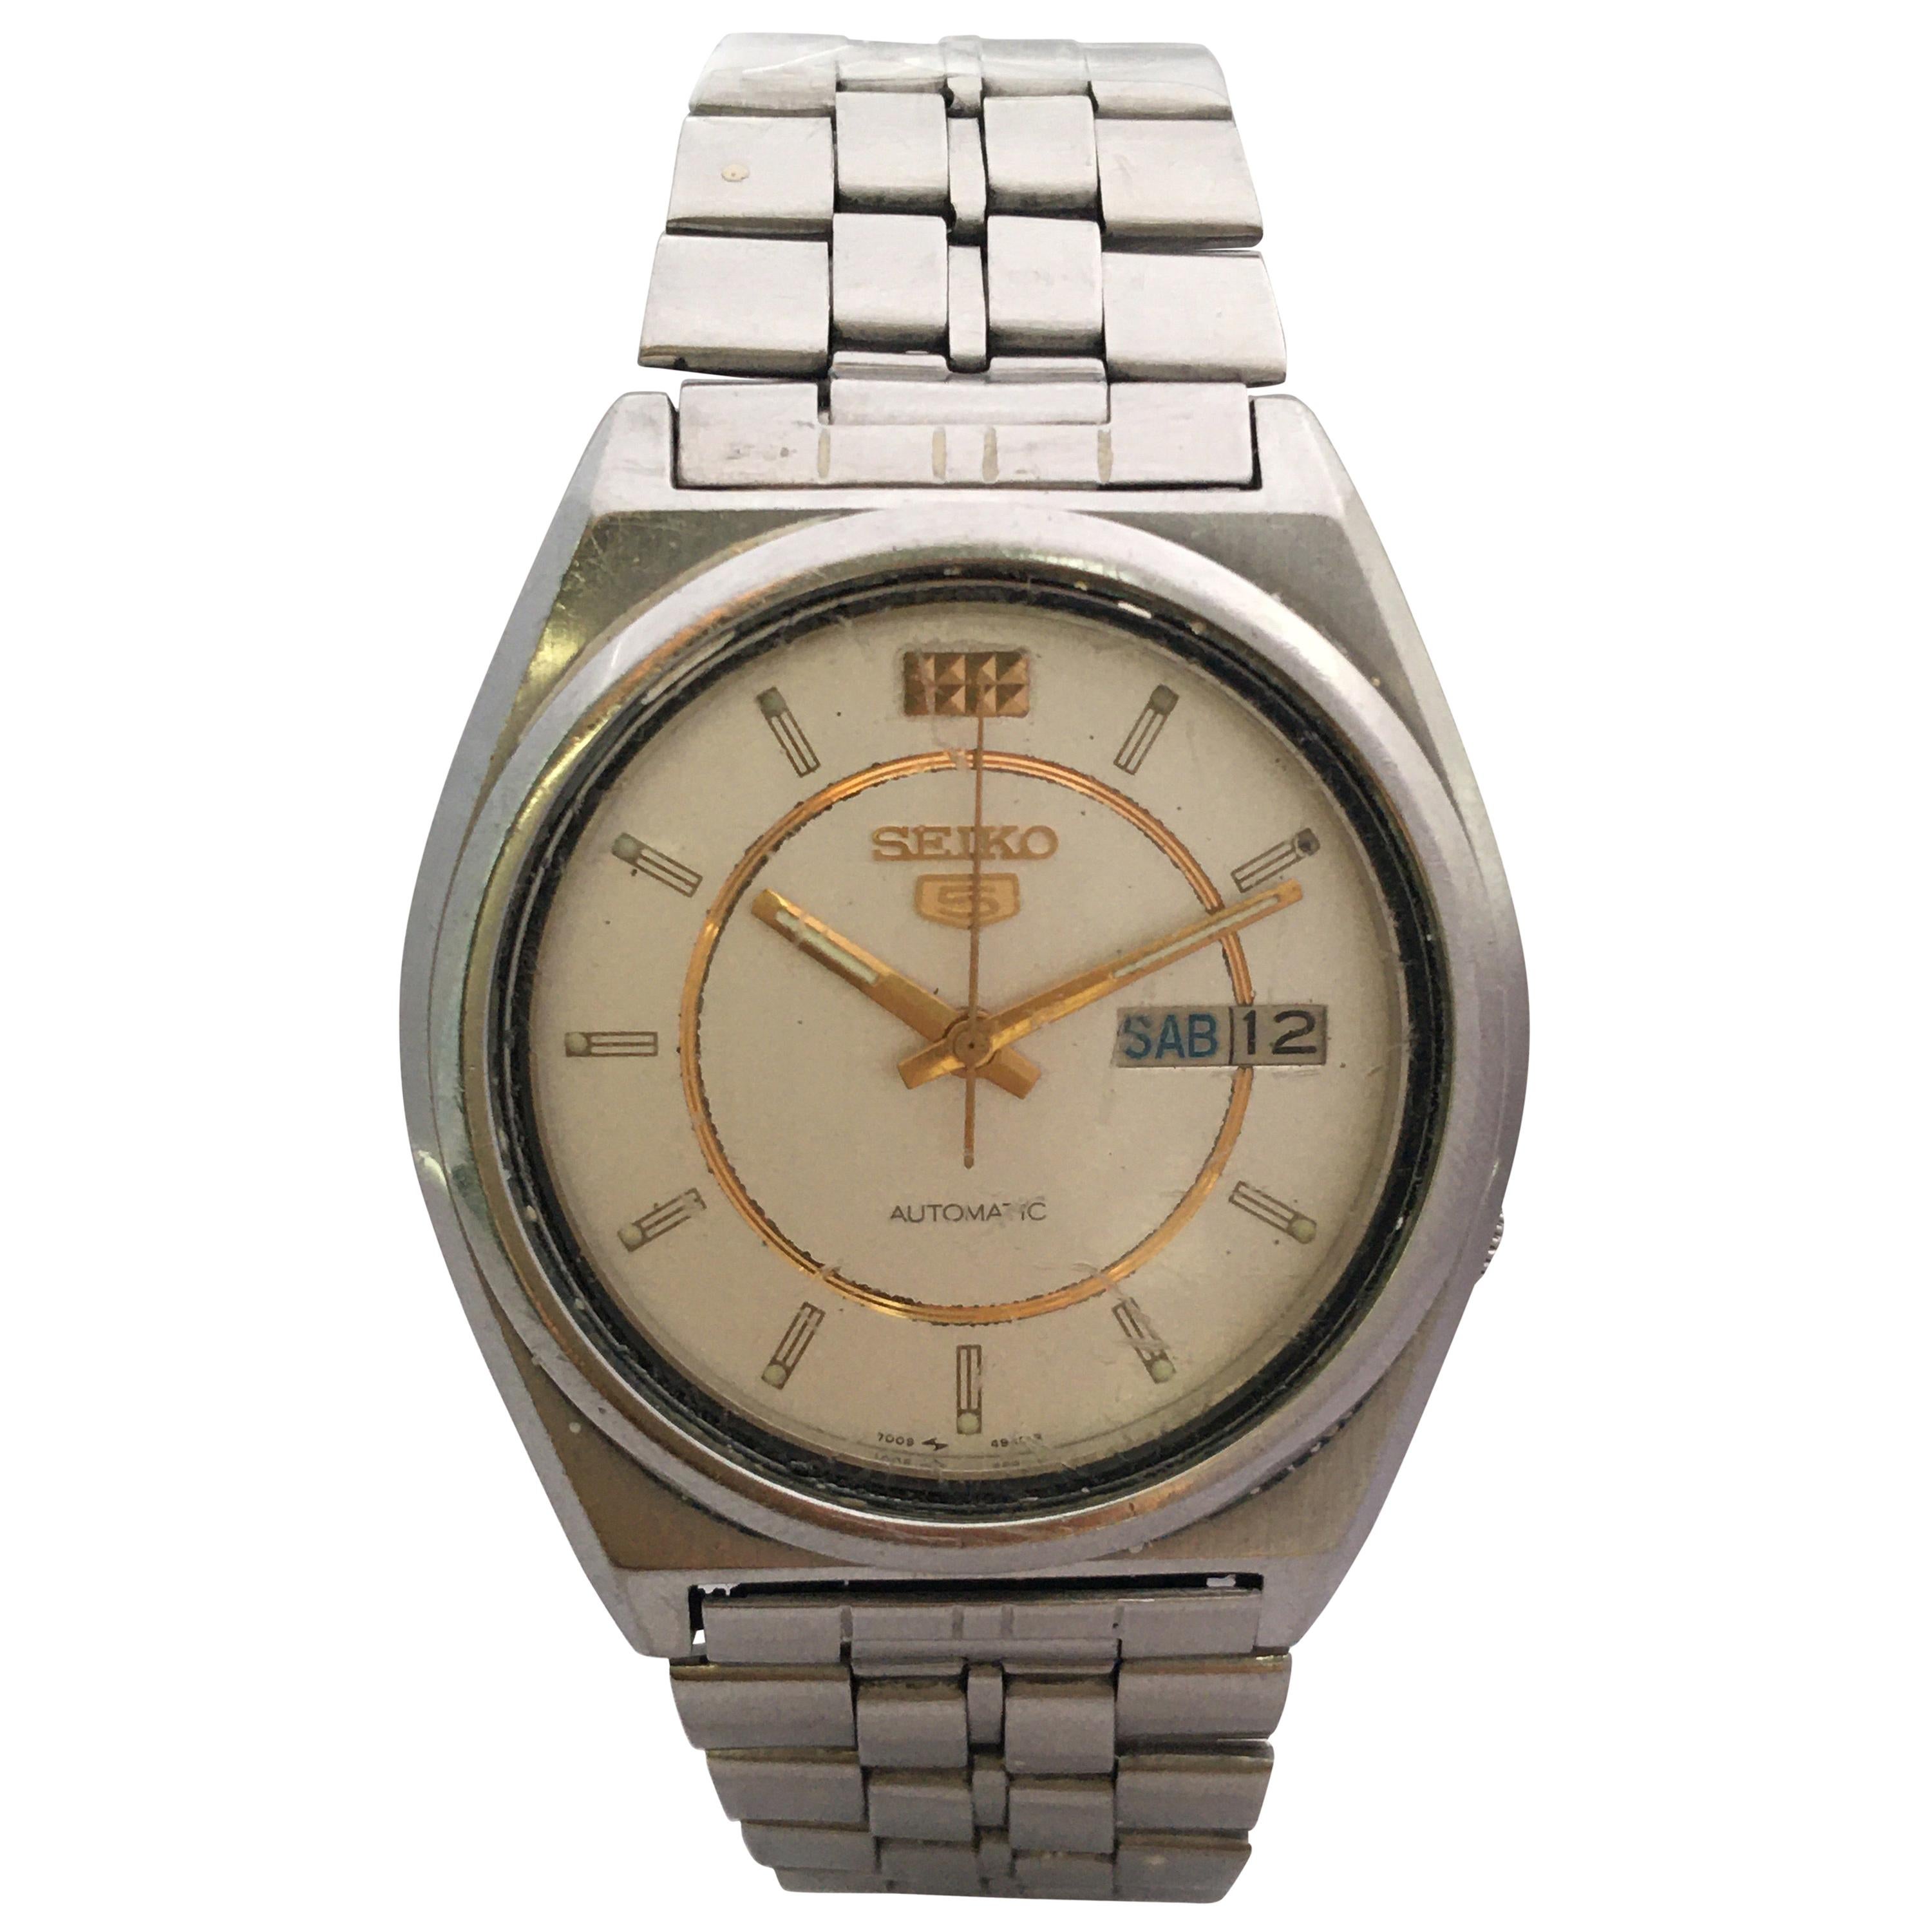 Vintage Seiko Watches - 6 For Sale on 1stDibs